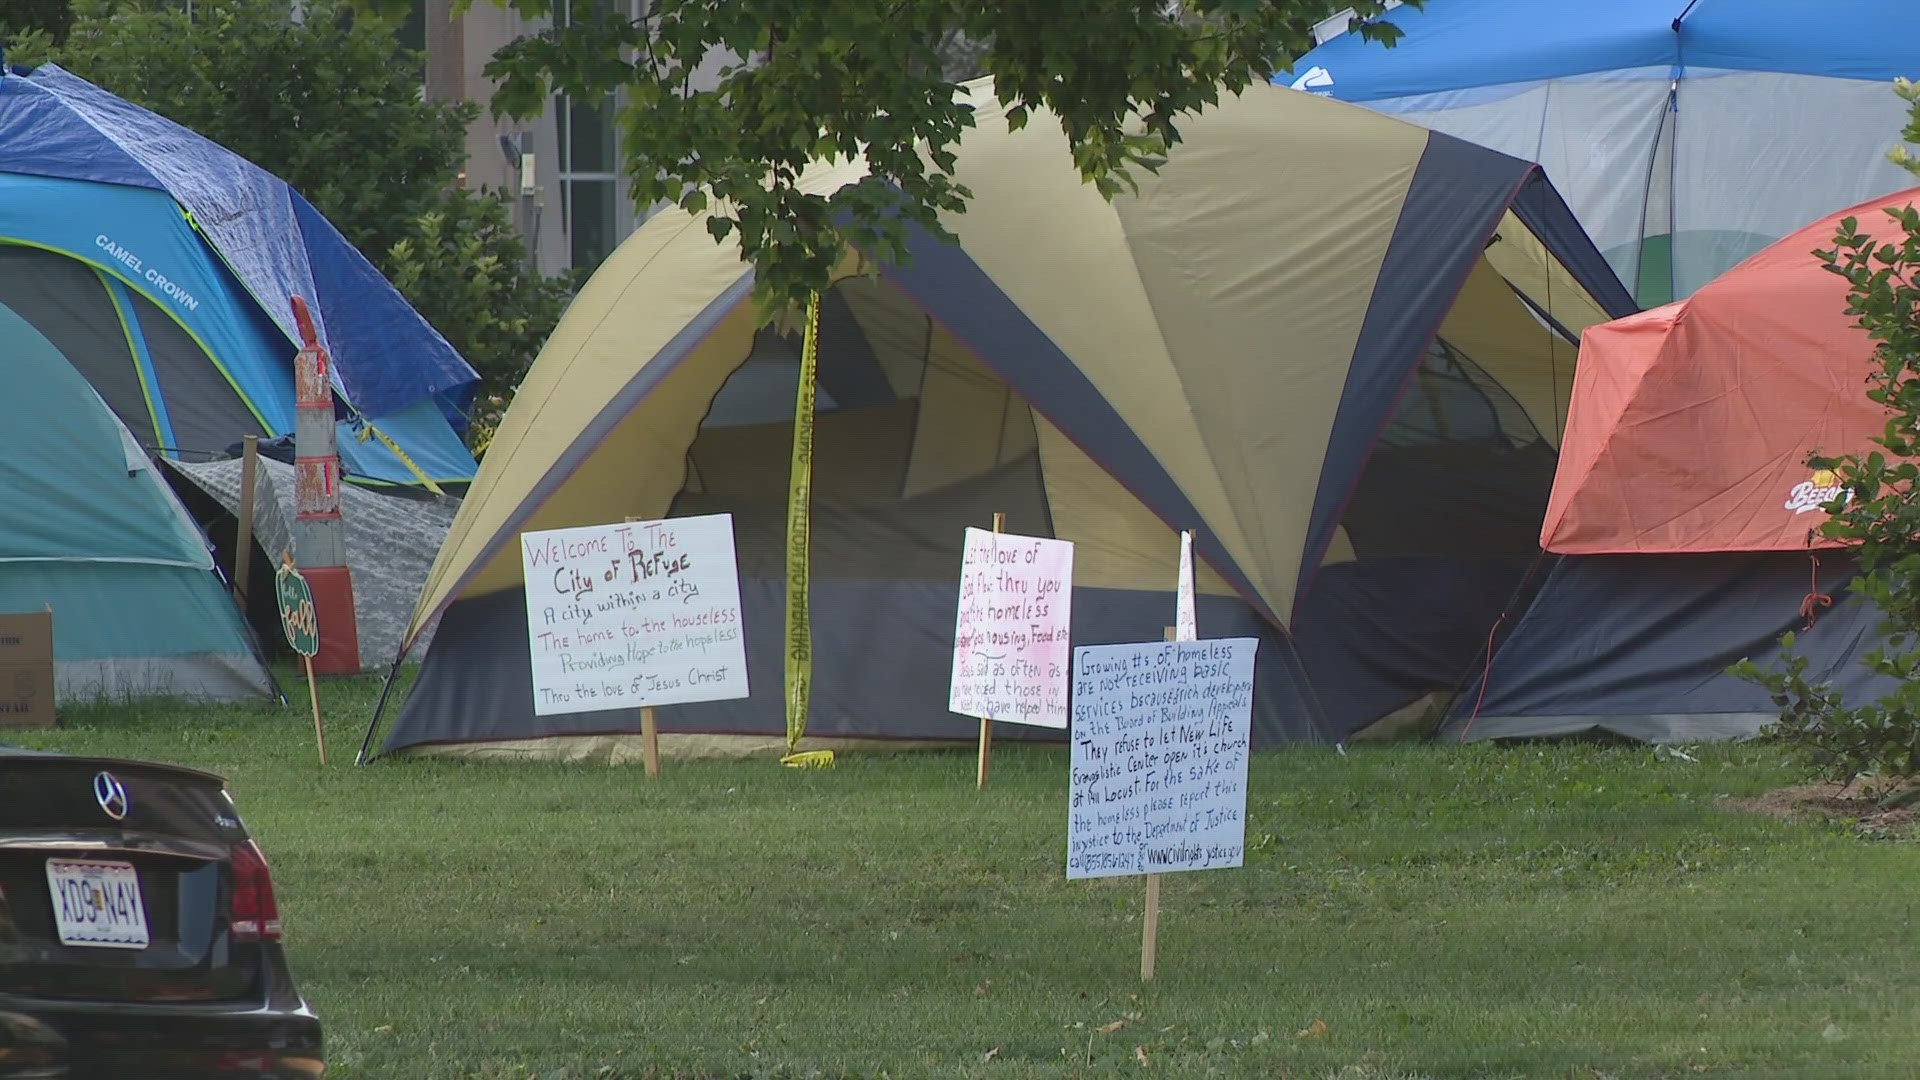 Several people who live and work in Downtown St. Louis said they praise the city's efforts. The homeless encampment outside of City Hall is cleared.